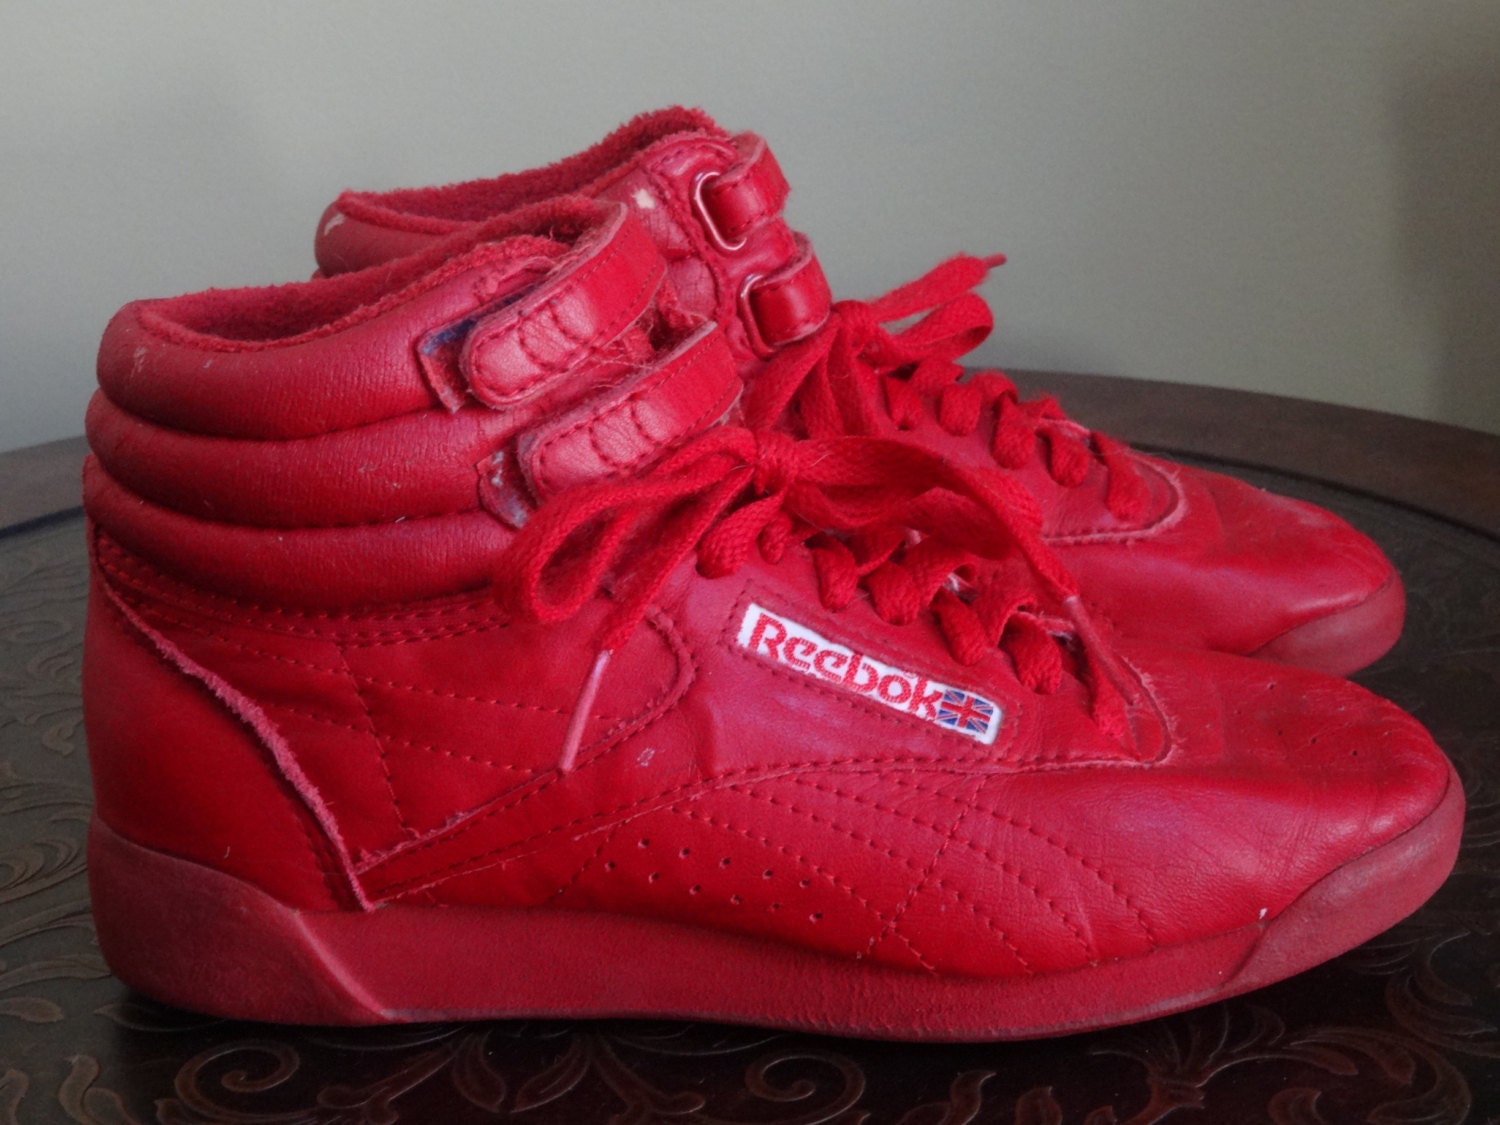 Vintage 1980s / 90s RED REEBOK High Top Classic Tennis Shoes